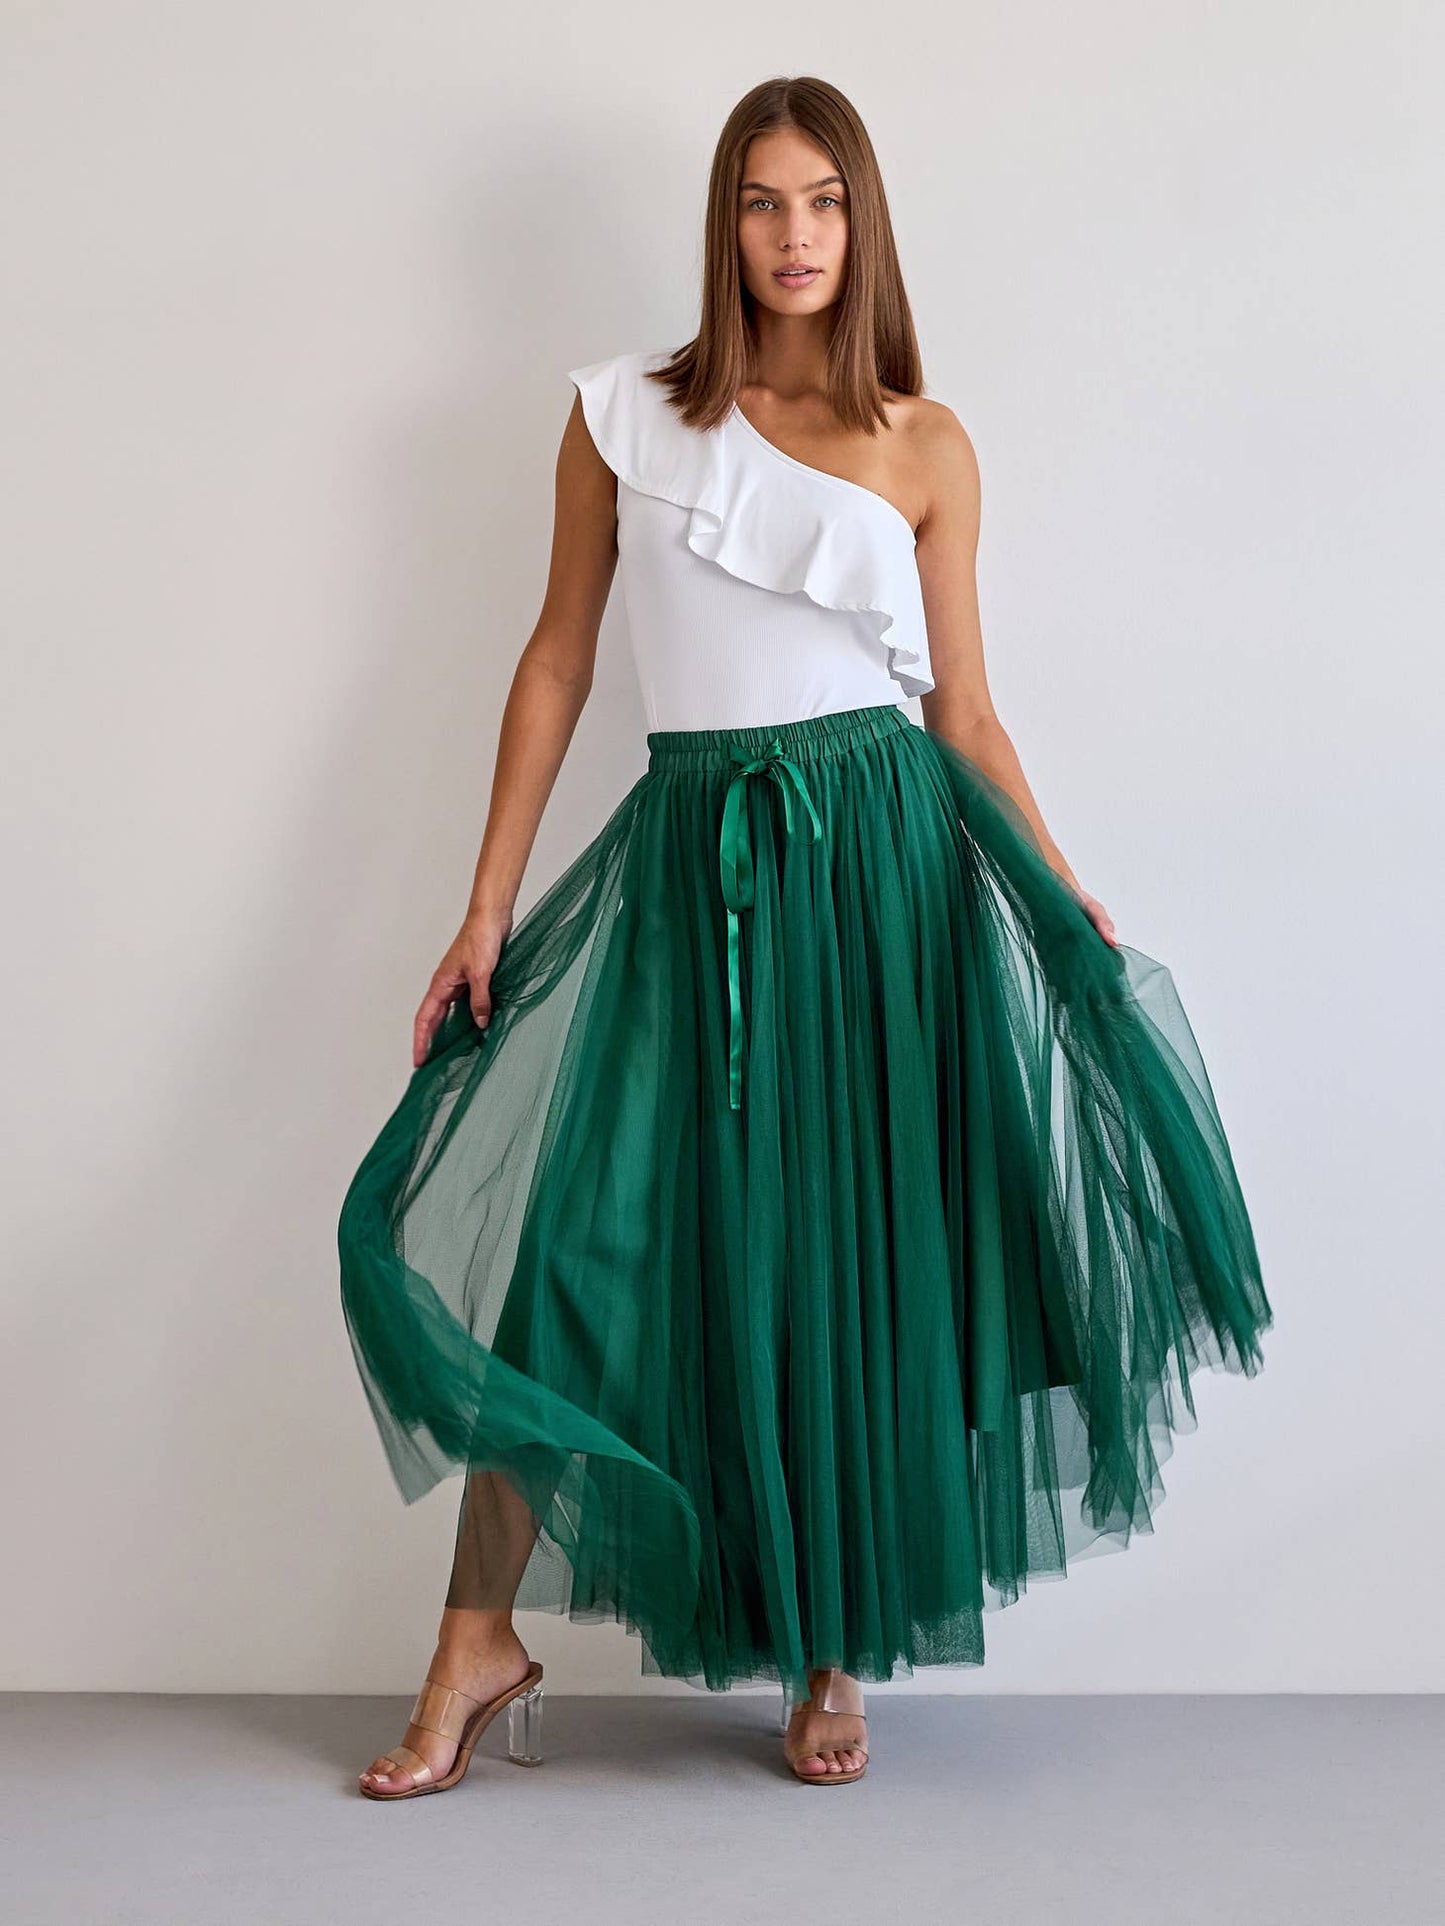 Chokolate Paris Tulle Skirts for Holiday (3 Colors)